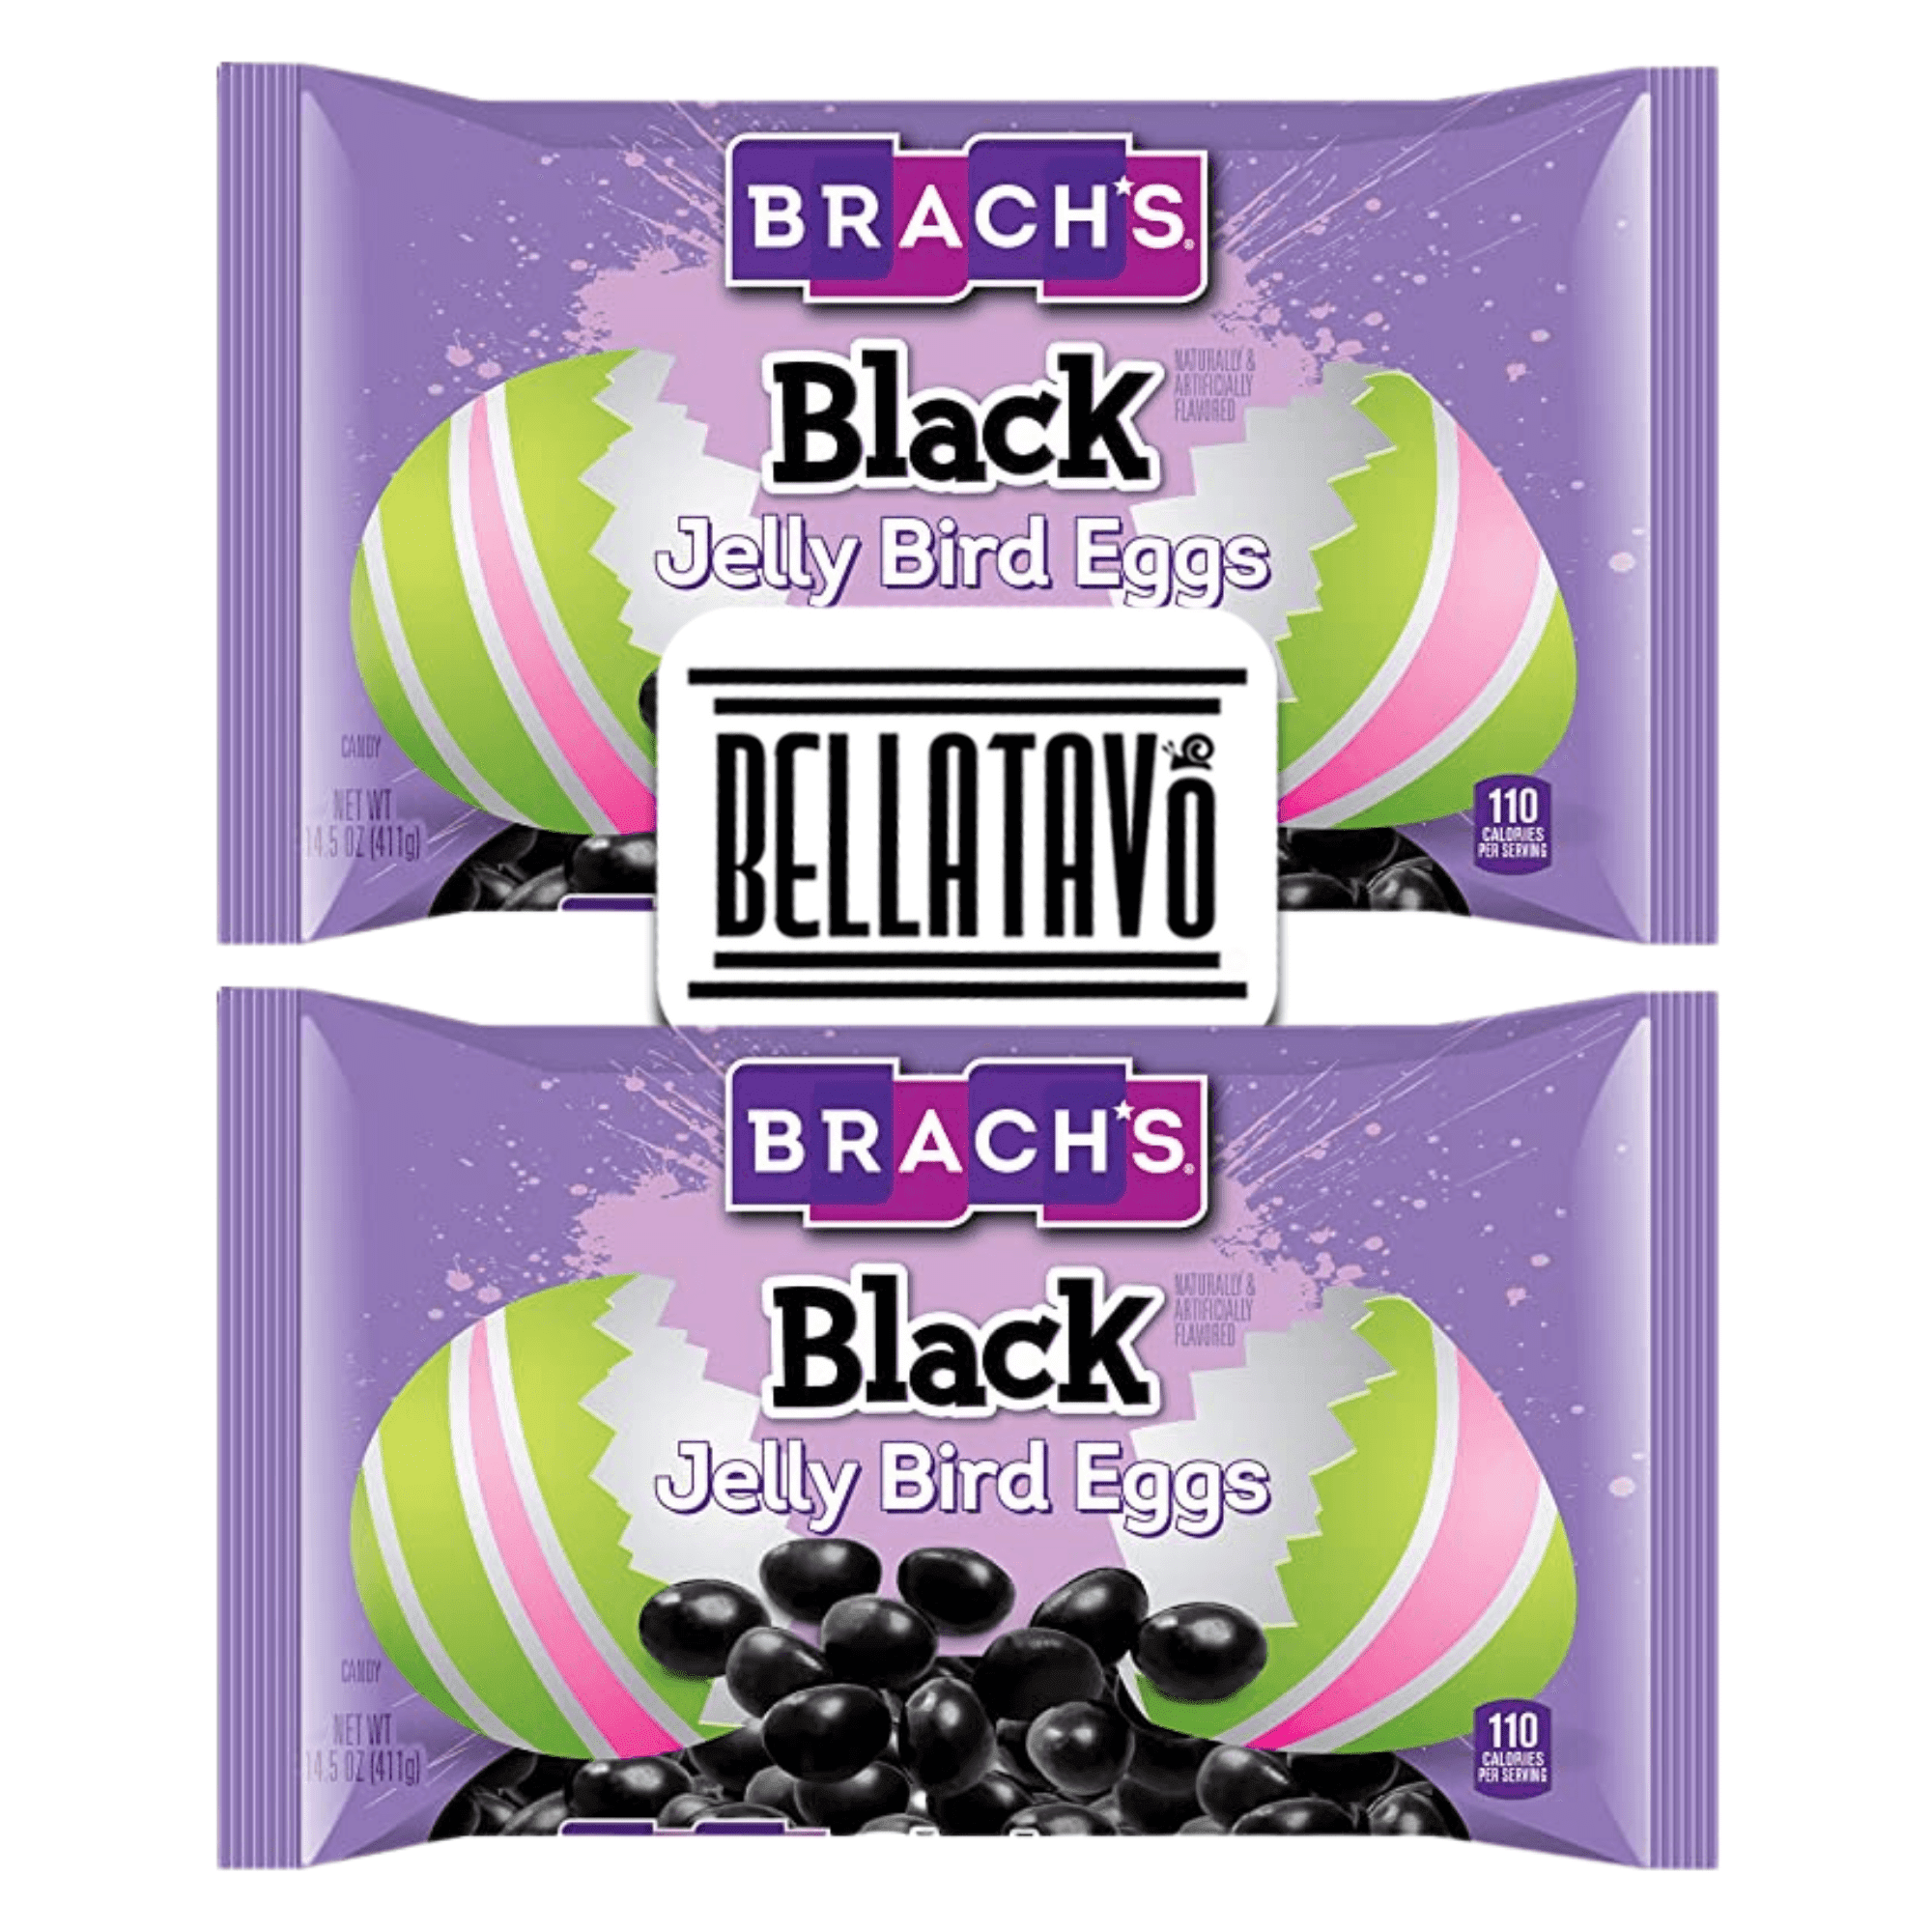 Licorice Jelly Beans Bundle. Includes Two-14.5 Oz Bags of Brach's Black  Jelly Bird Eggs Plus a BELLATAVO Fridge Magnet! Black Jelly Bird Eggs are  Licorice Jelly Beans for Easter Eggs! 